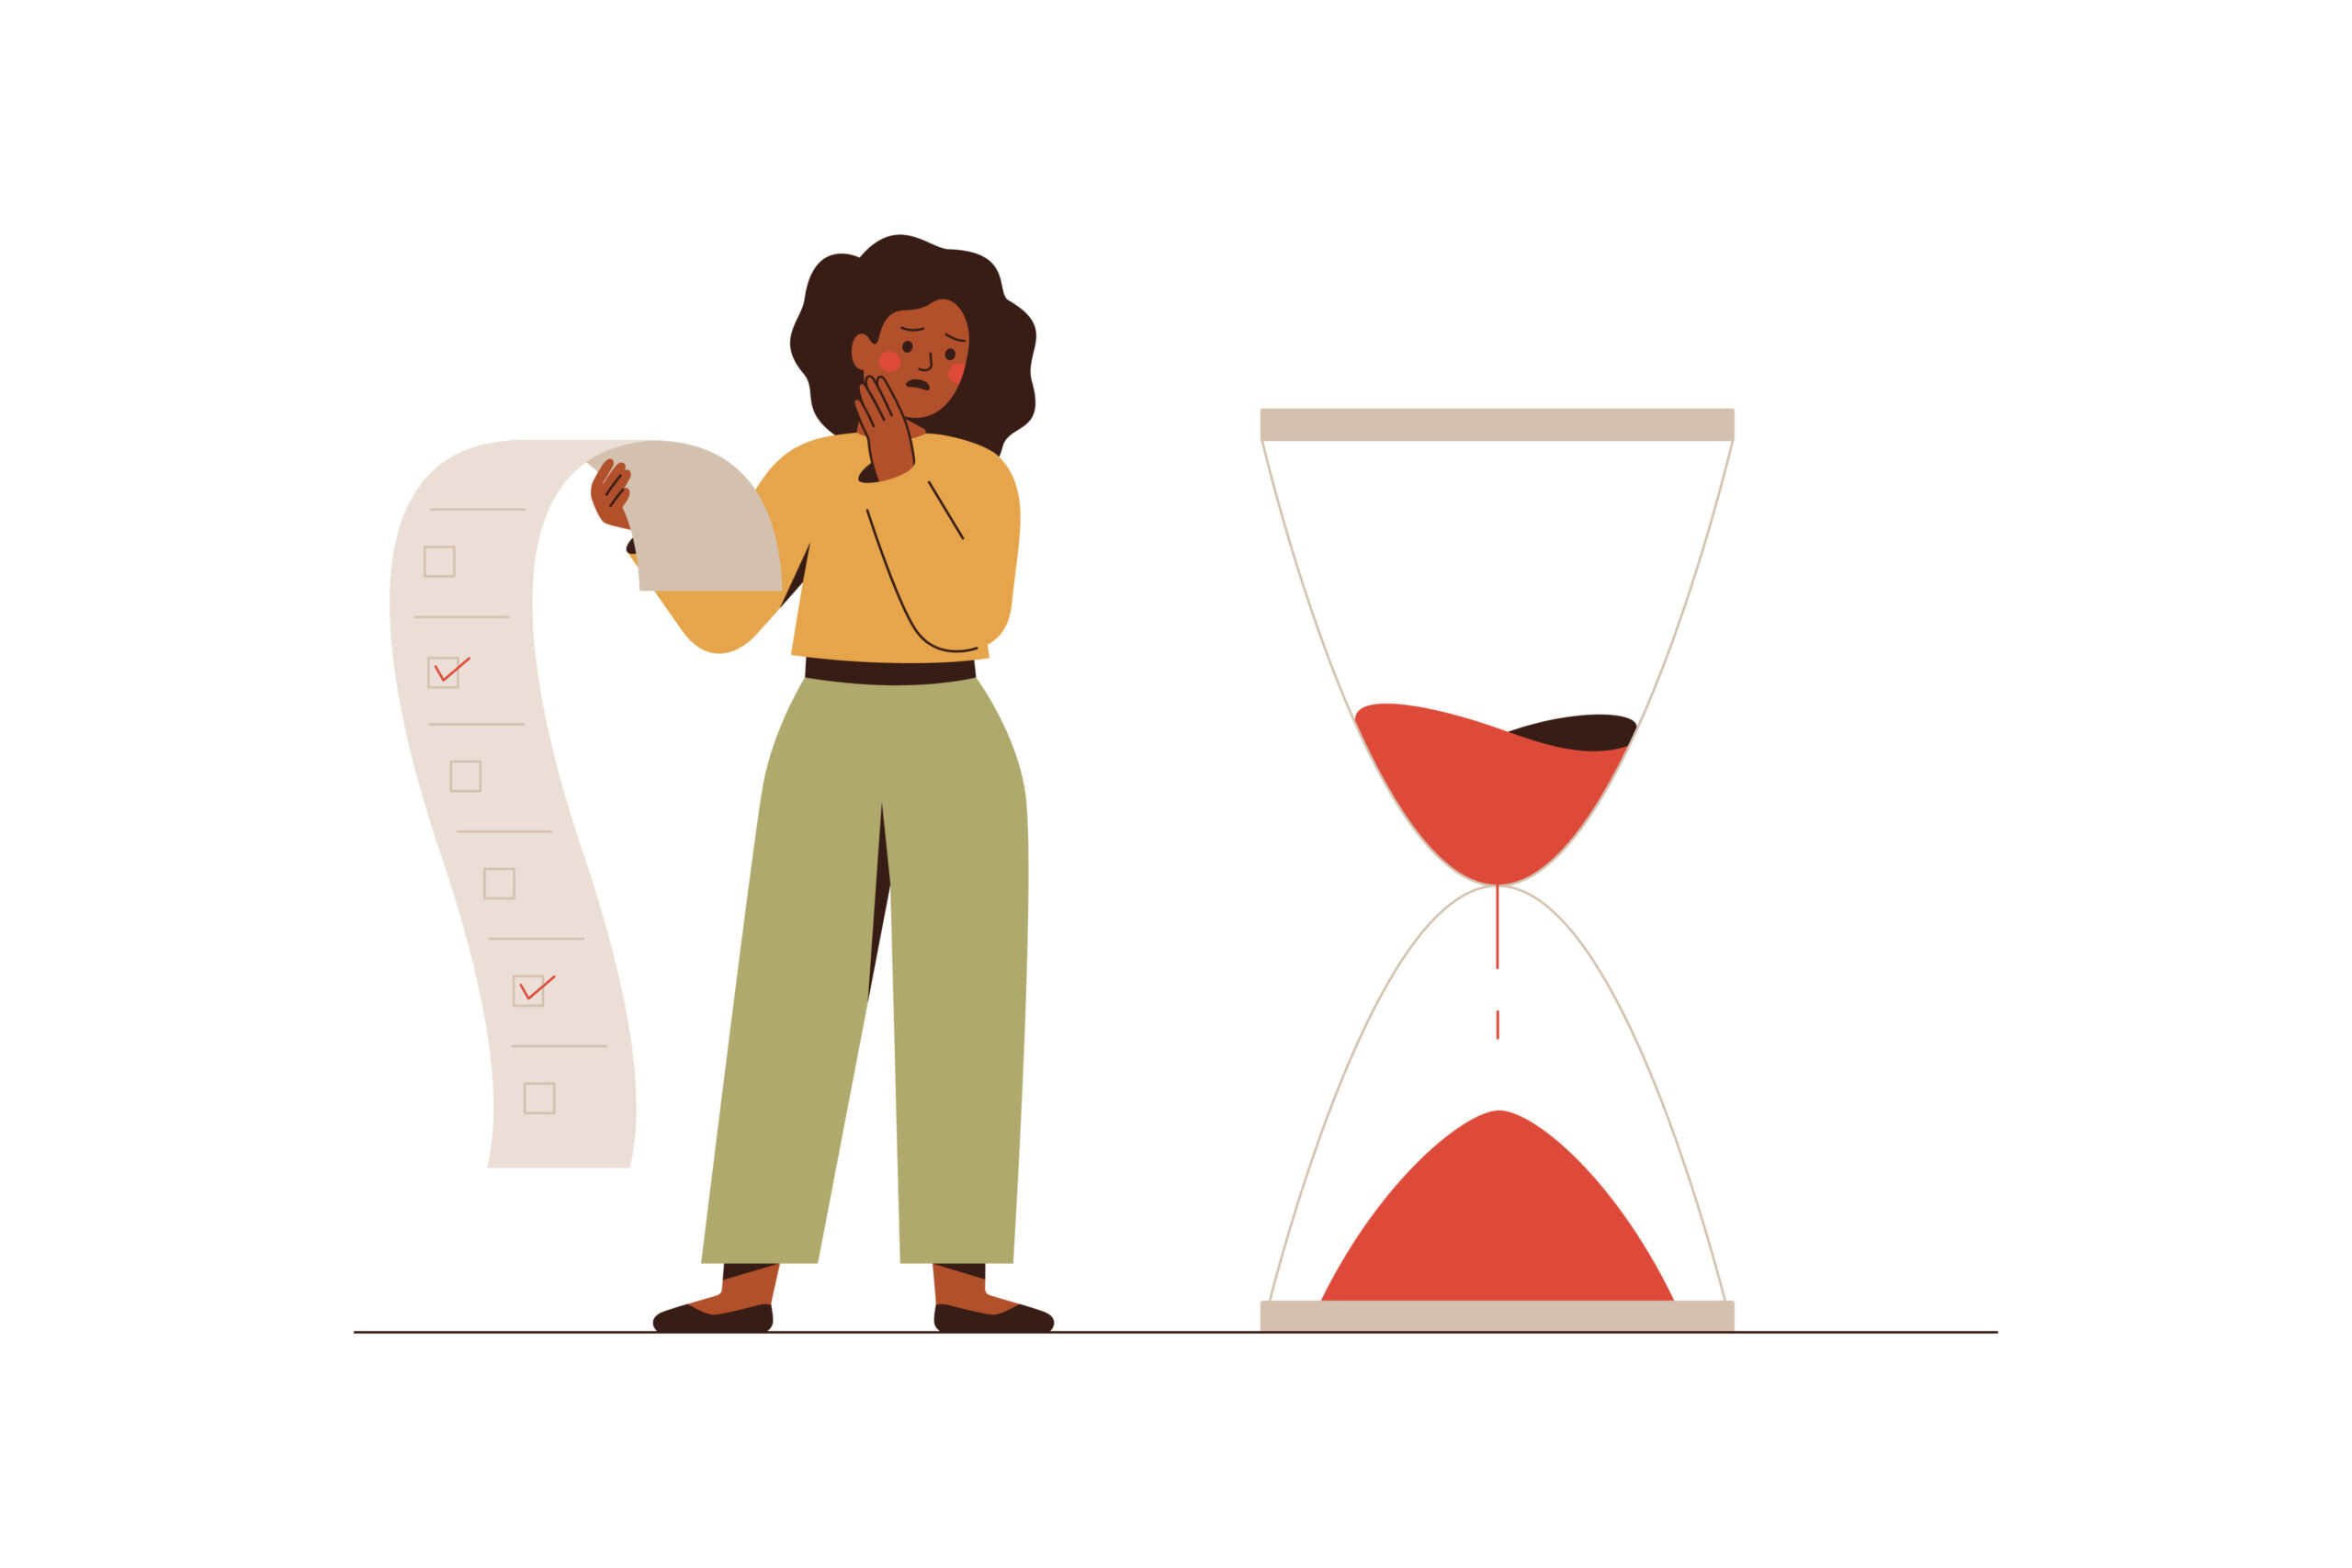 Vector illustration of fundraiser looking at hourglass with anxiety; concept of time management [The Startling Reality of What Little Time You Have to Work With Donors]